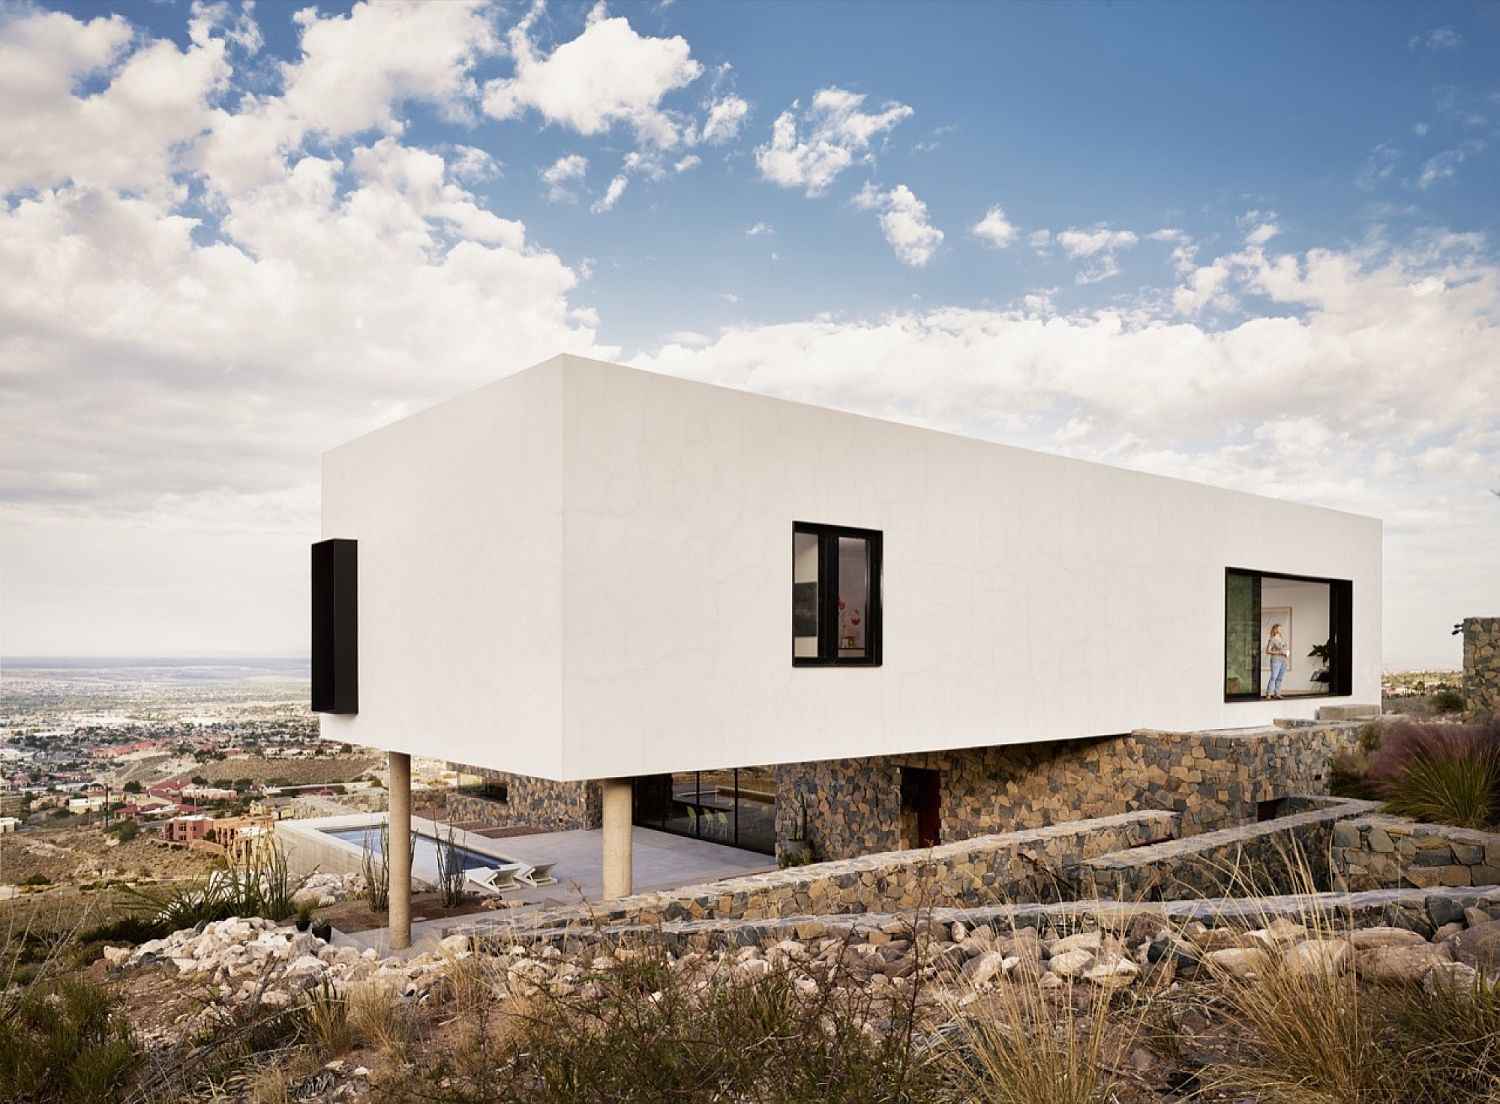 Striaght-lines-and-a-facade-in-white-give-the-mountain-home-a-contemporary-look